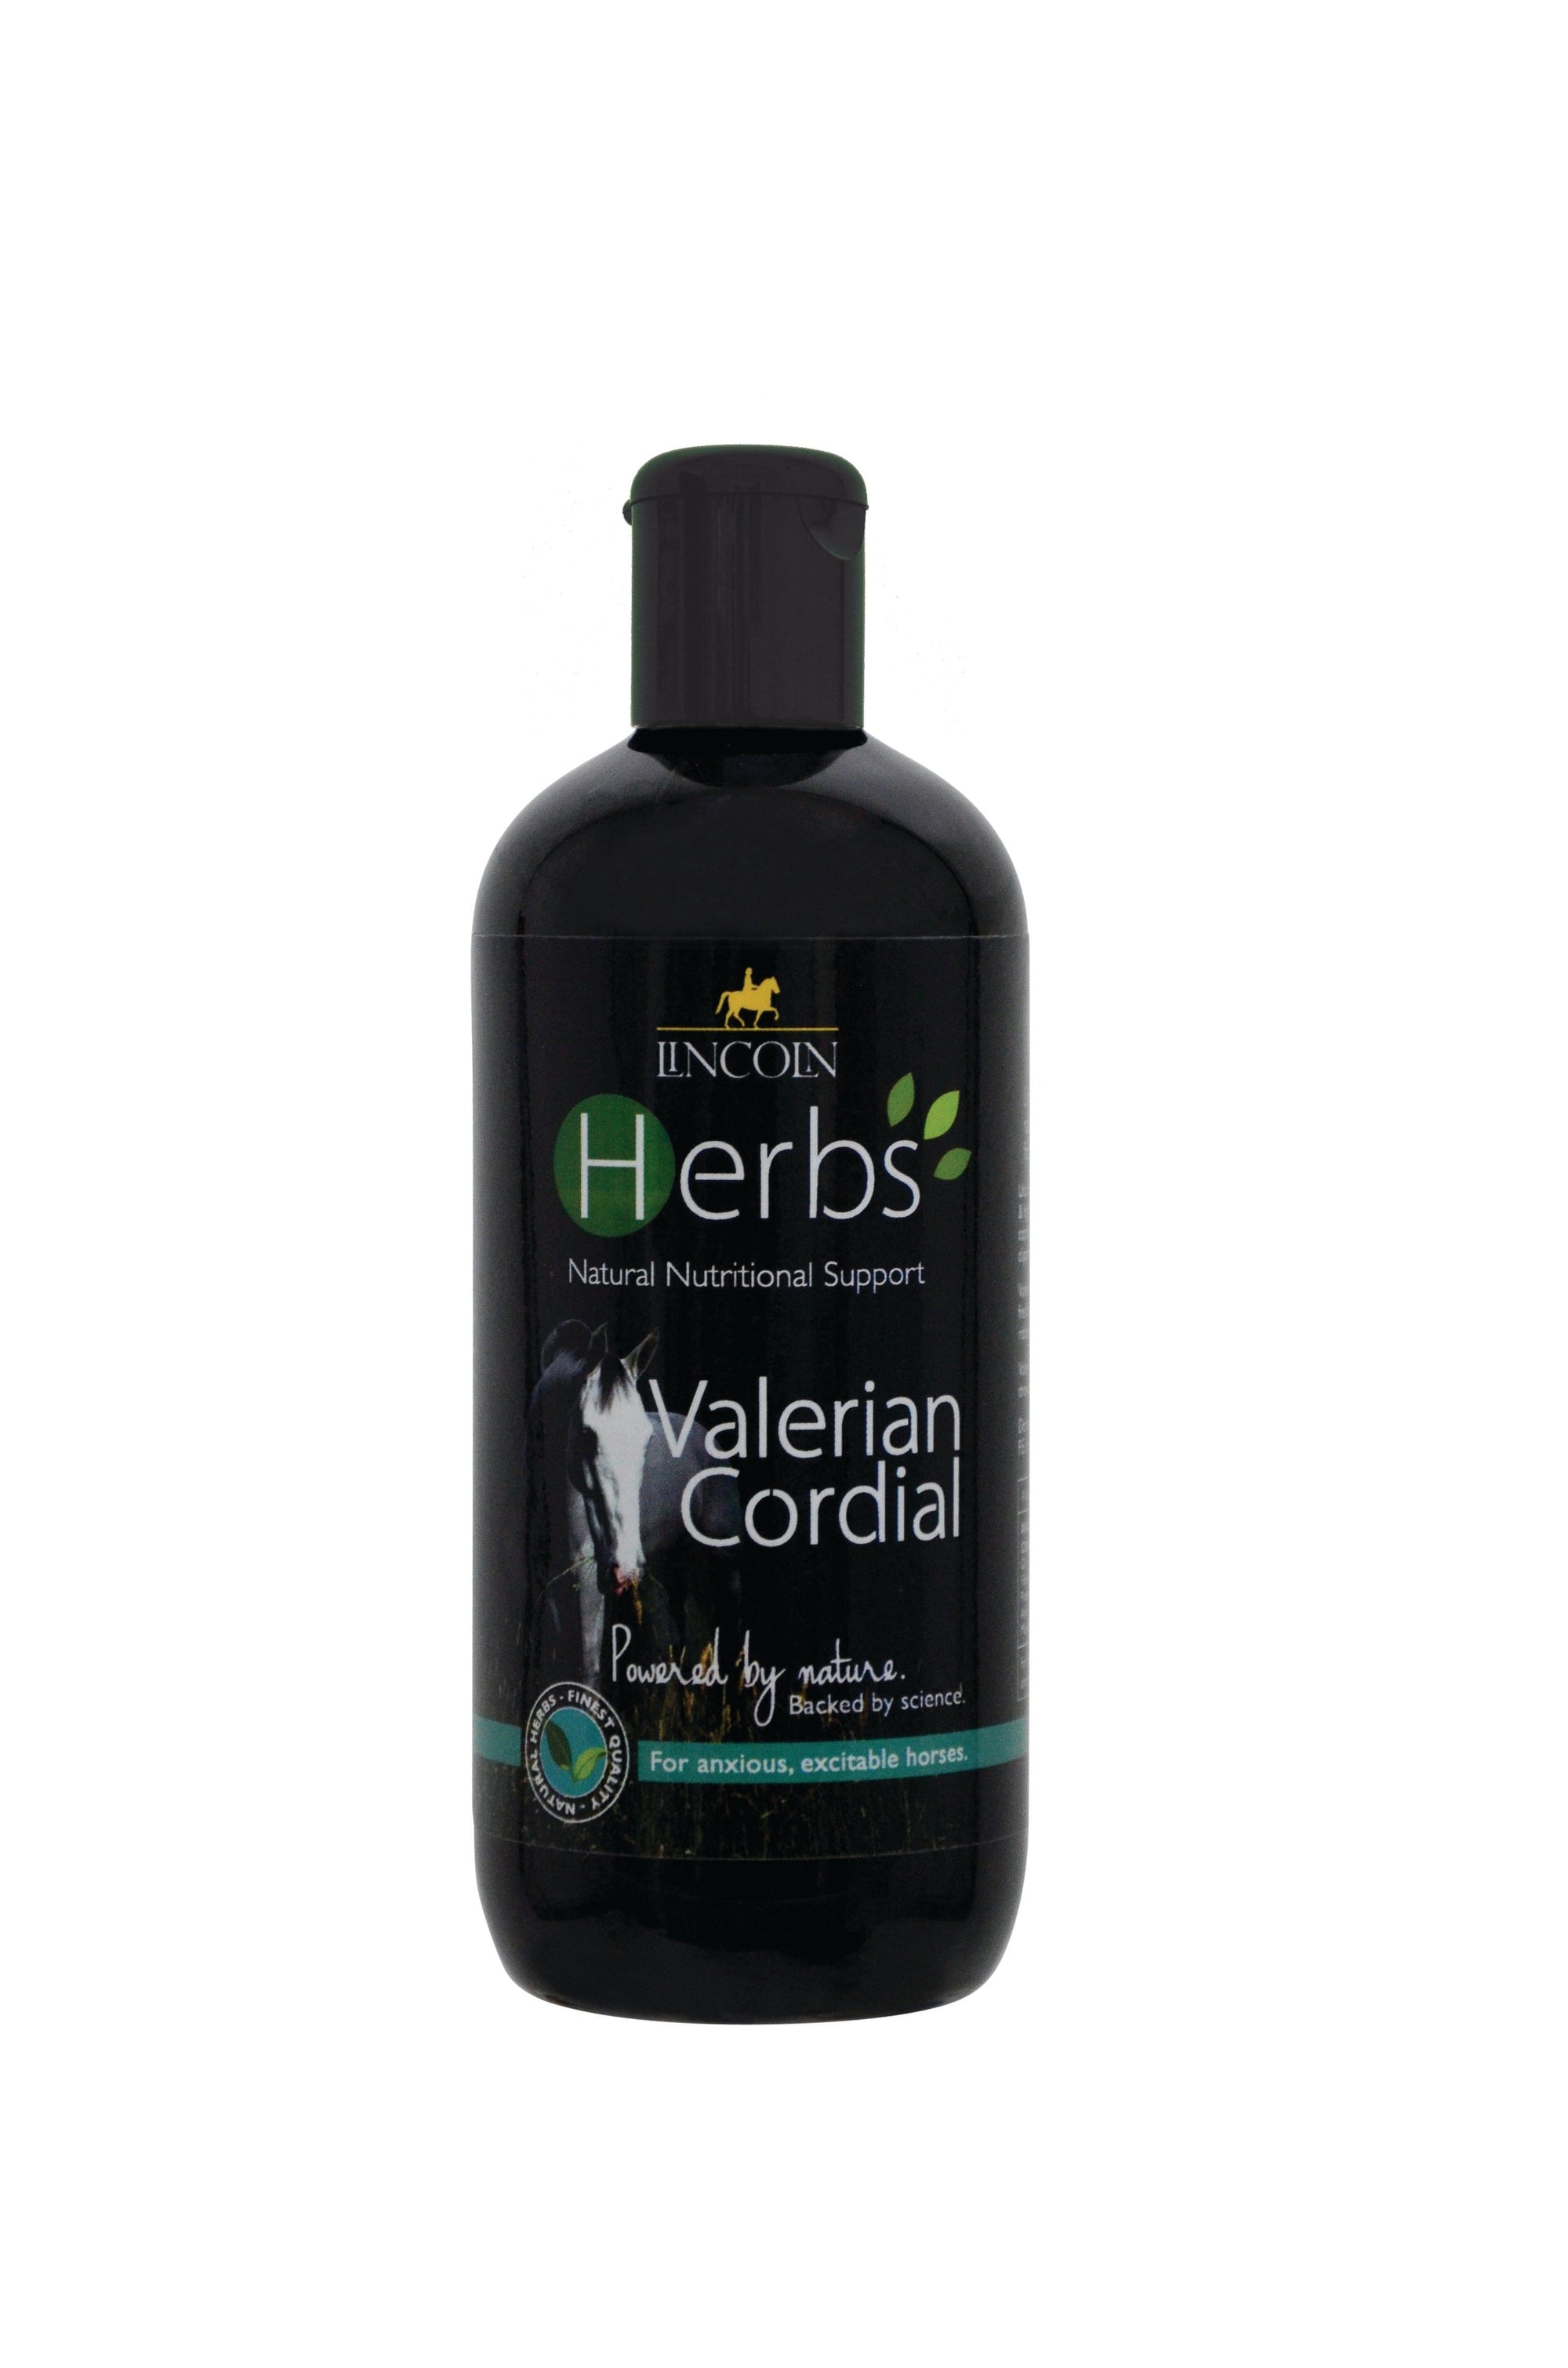 Lincoln herbs valerian cordial